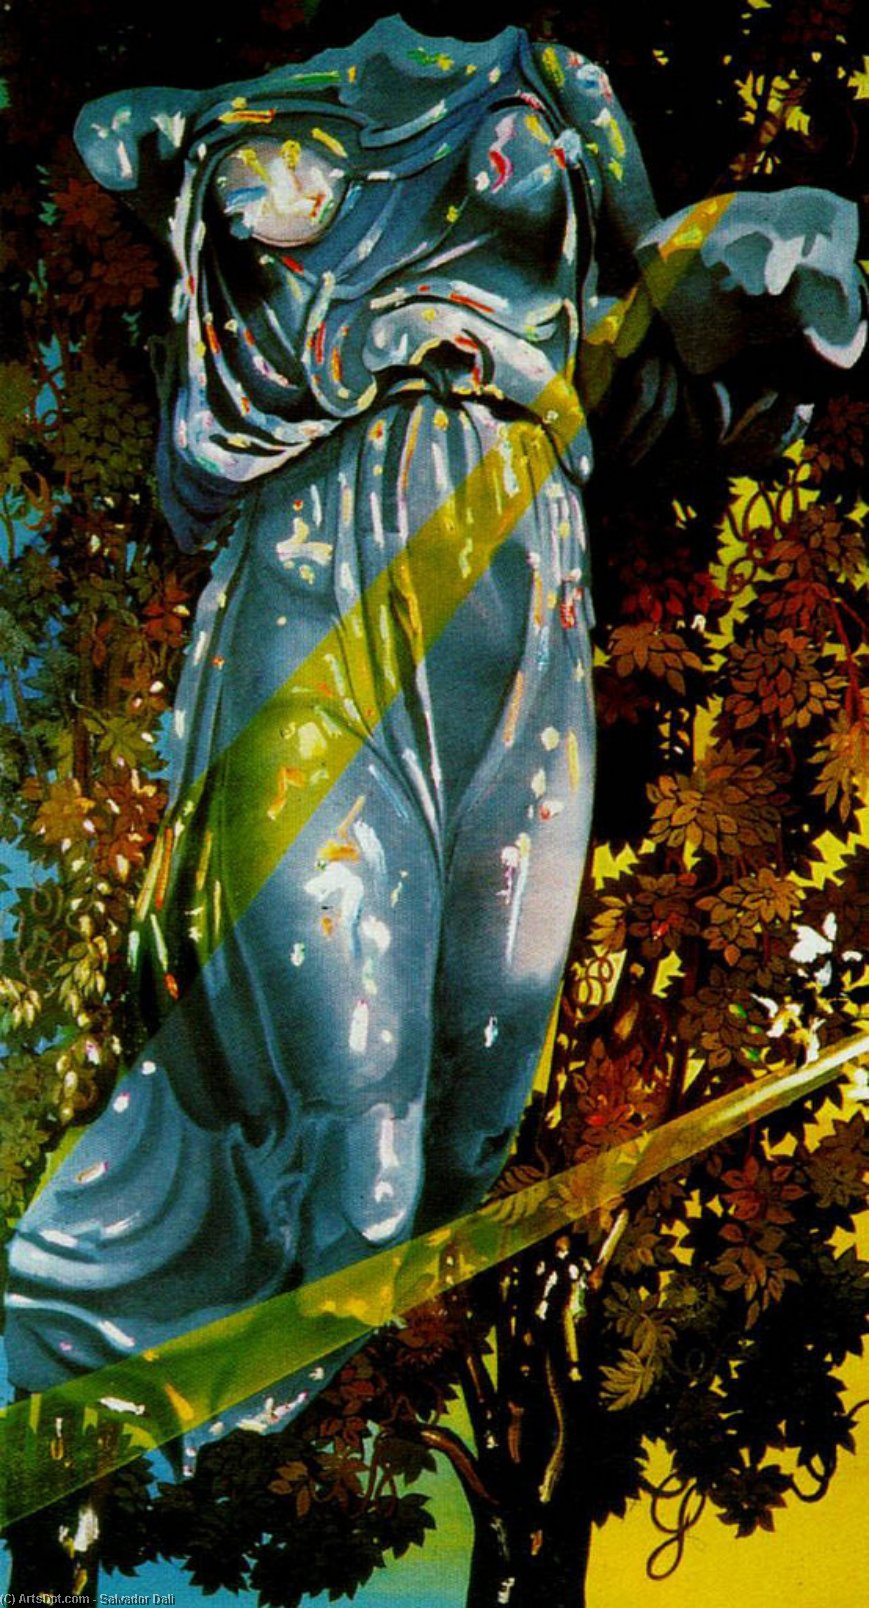 WikiOO.org - 백과 사전 - 회화, 삽화 Salvador Dali - Nike, Victory Goddess of Samothrace, Appears in a Tree Bathed in Light, circa 1977